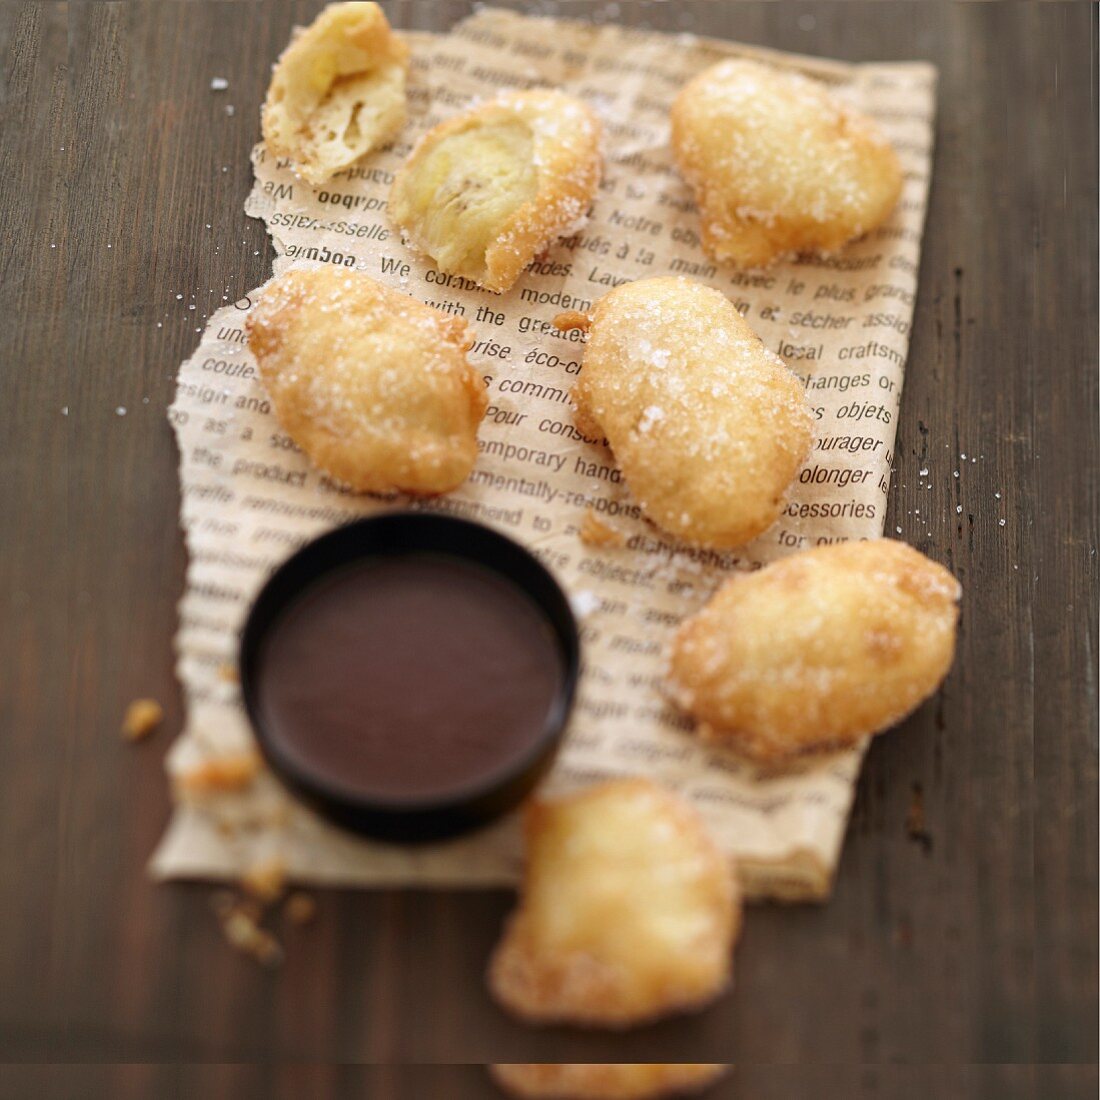 Banana fritters with choco-coconut sauce